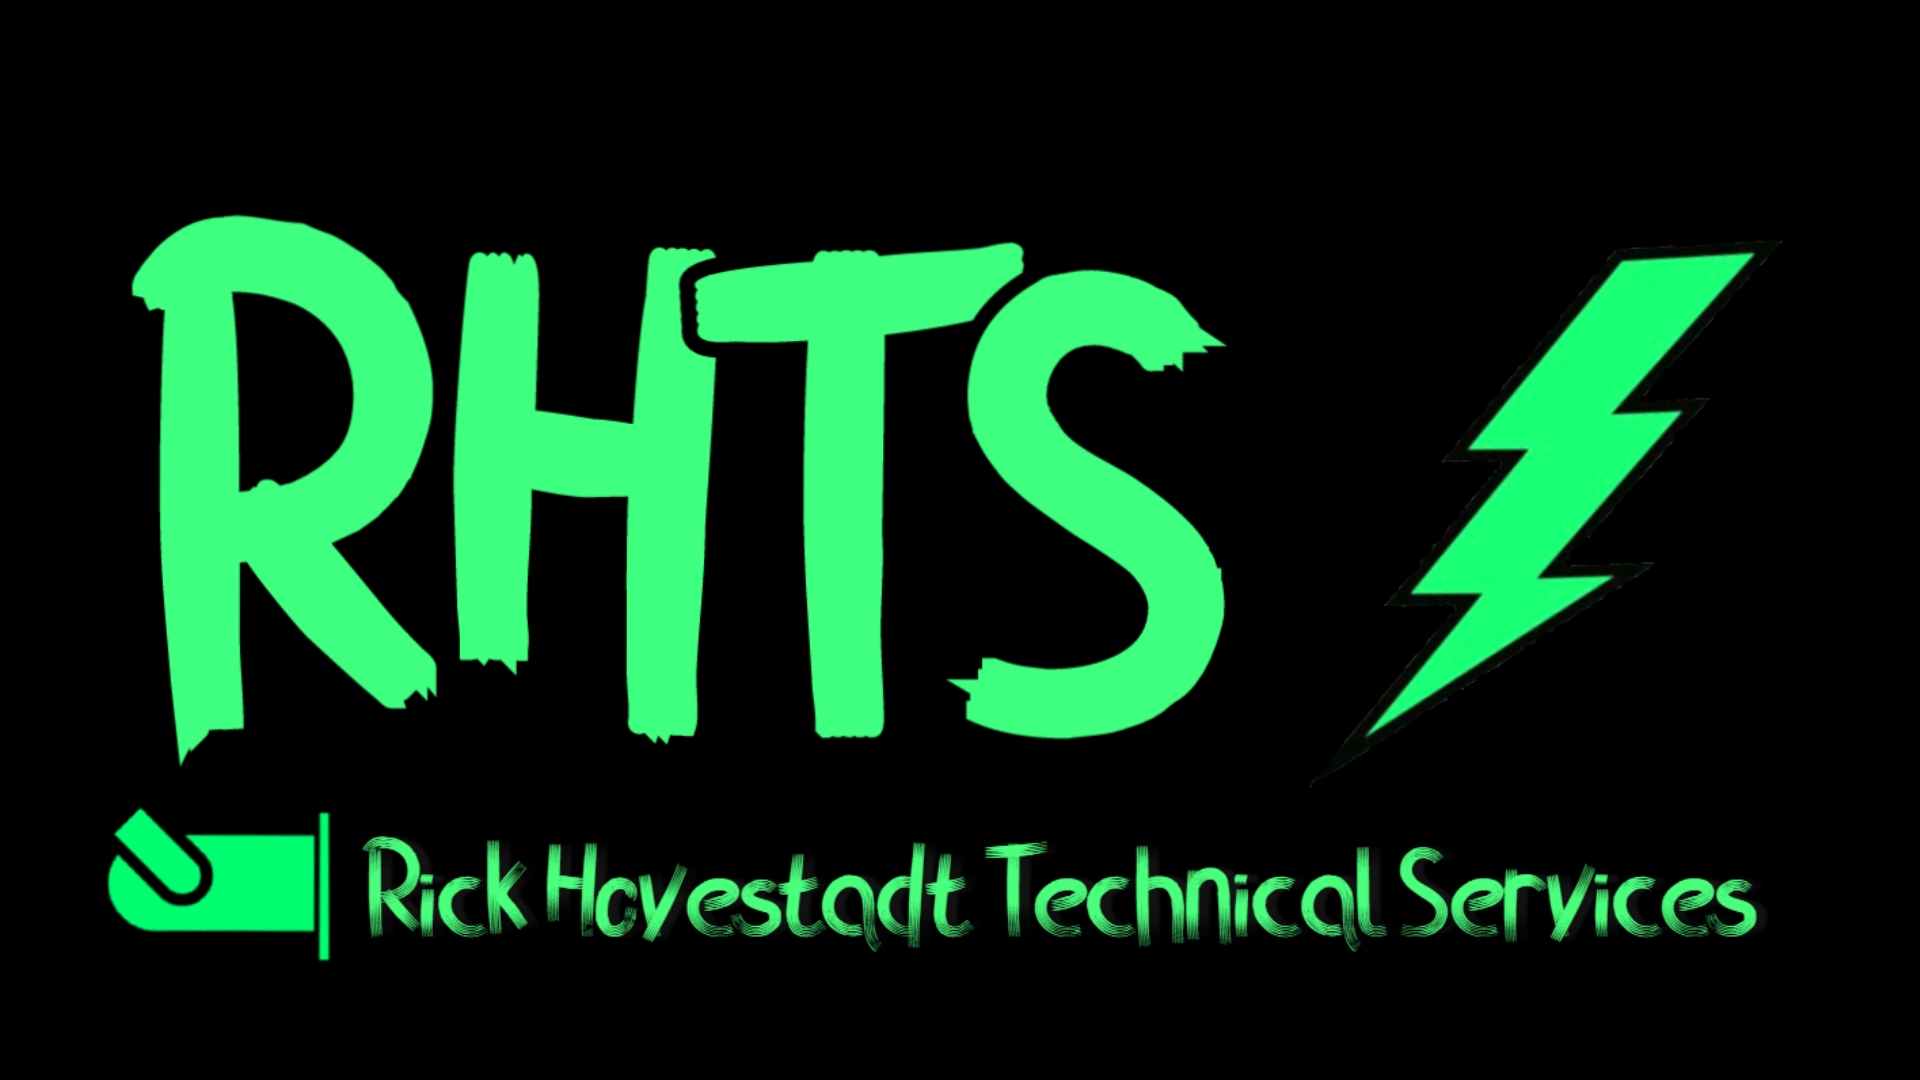 Rick Hovestadt Technical Services